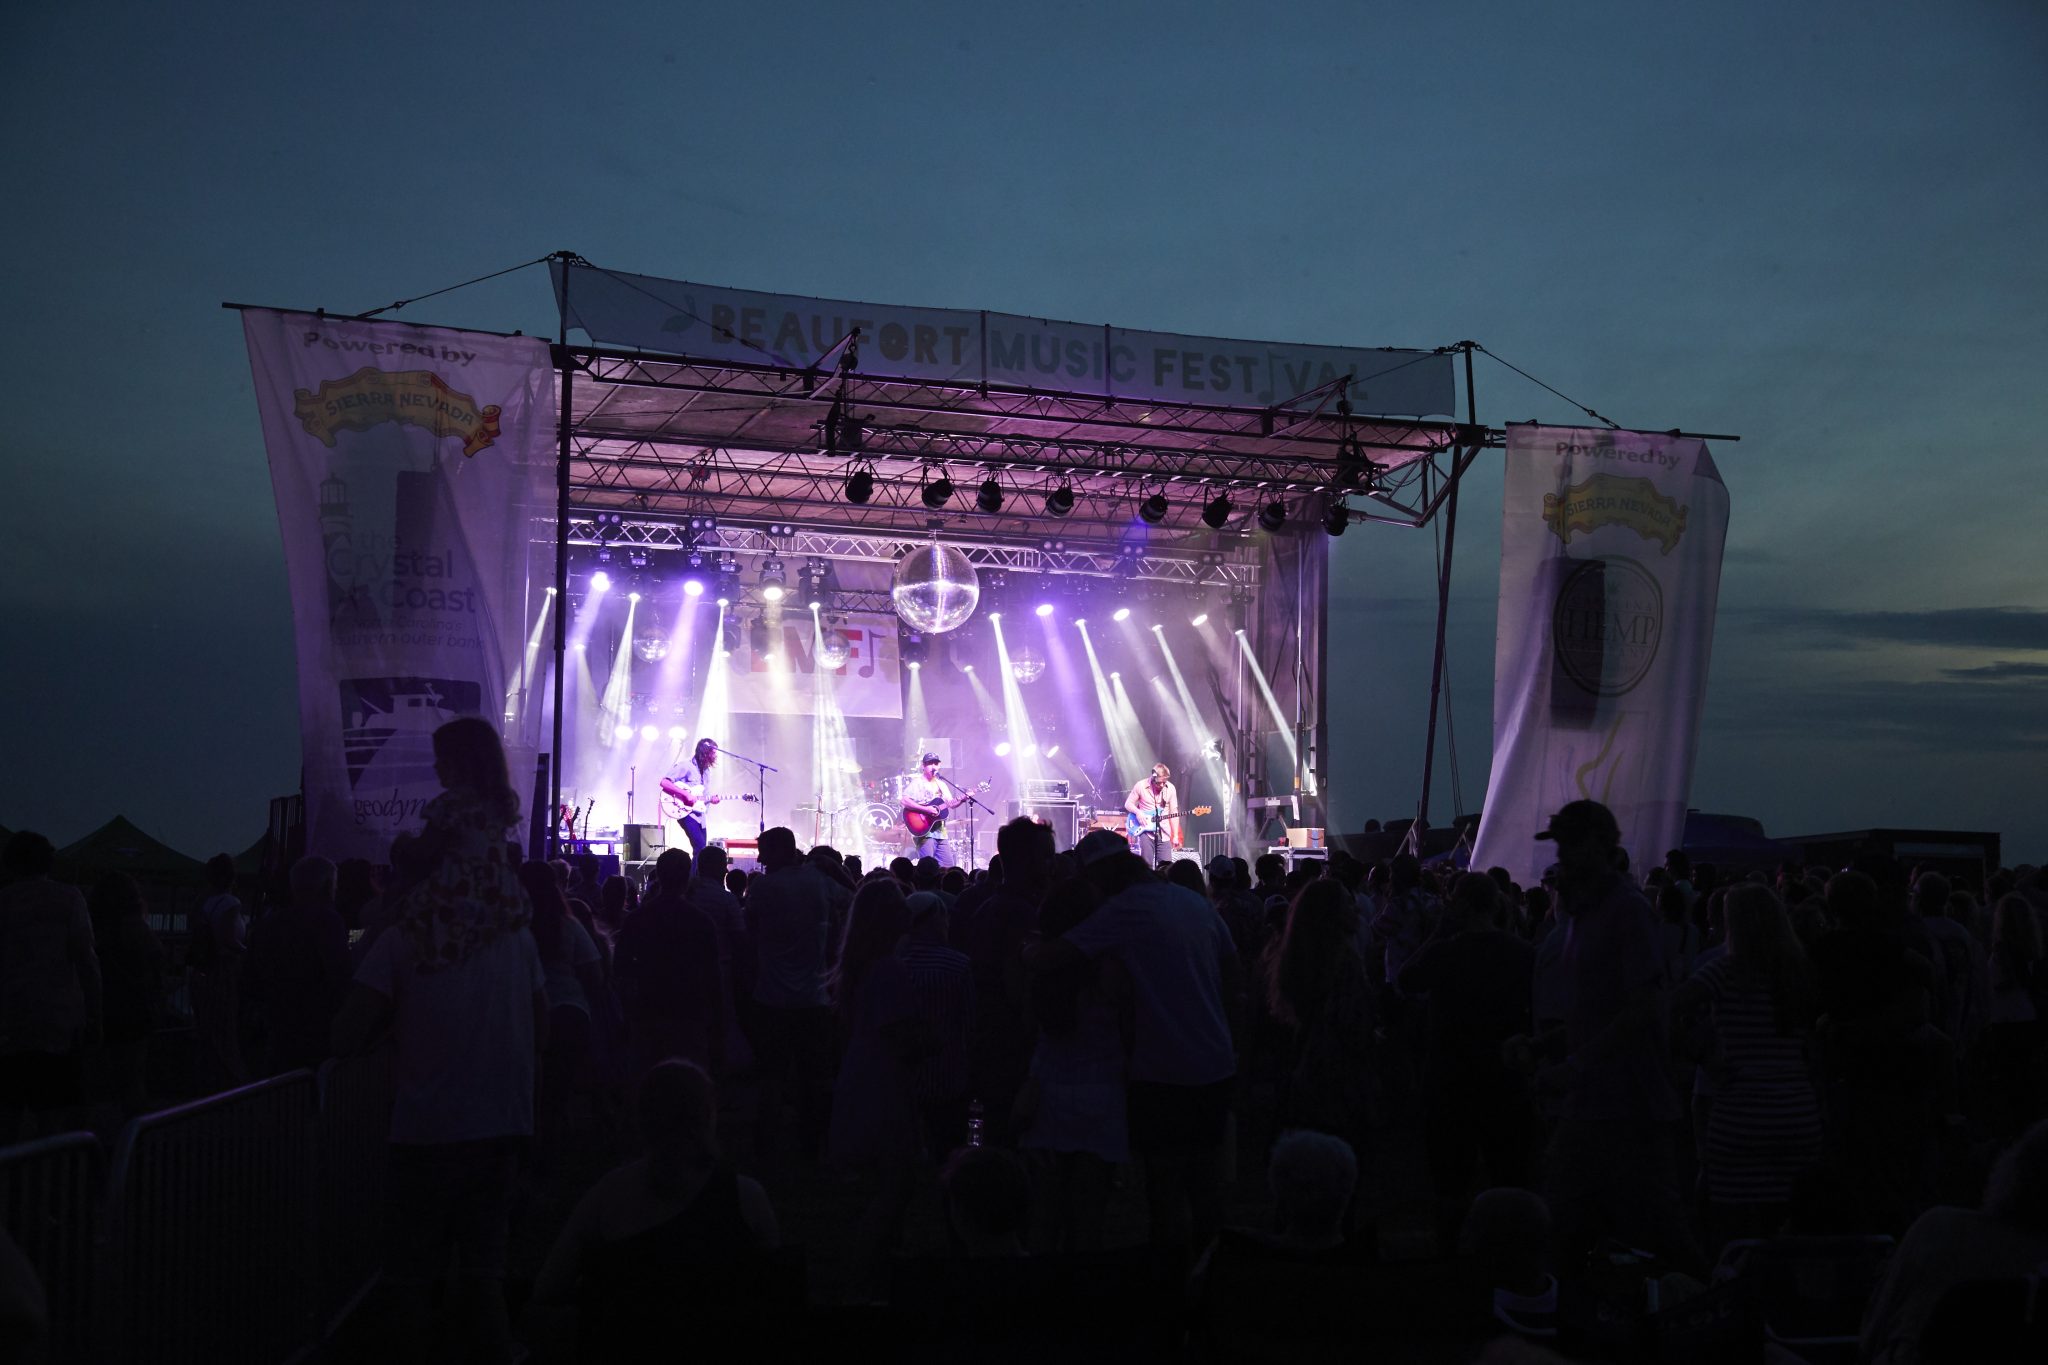 Beaufort Music Festival The best weekend on the Crystal Coast!